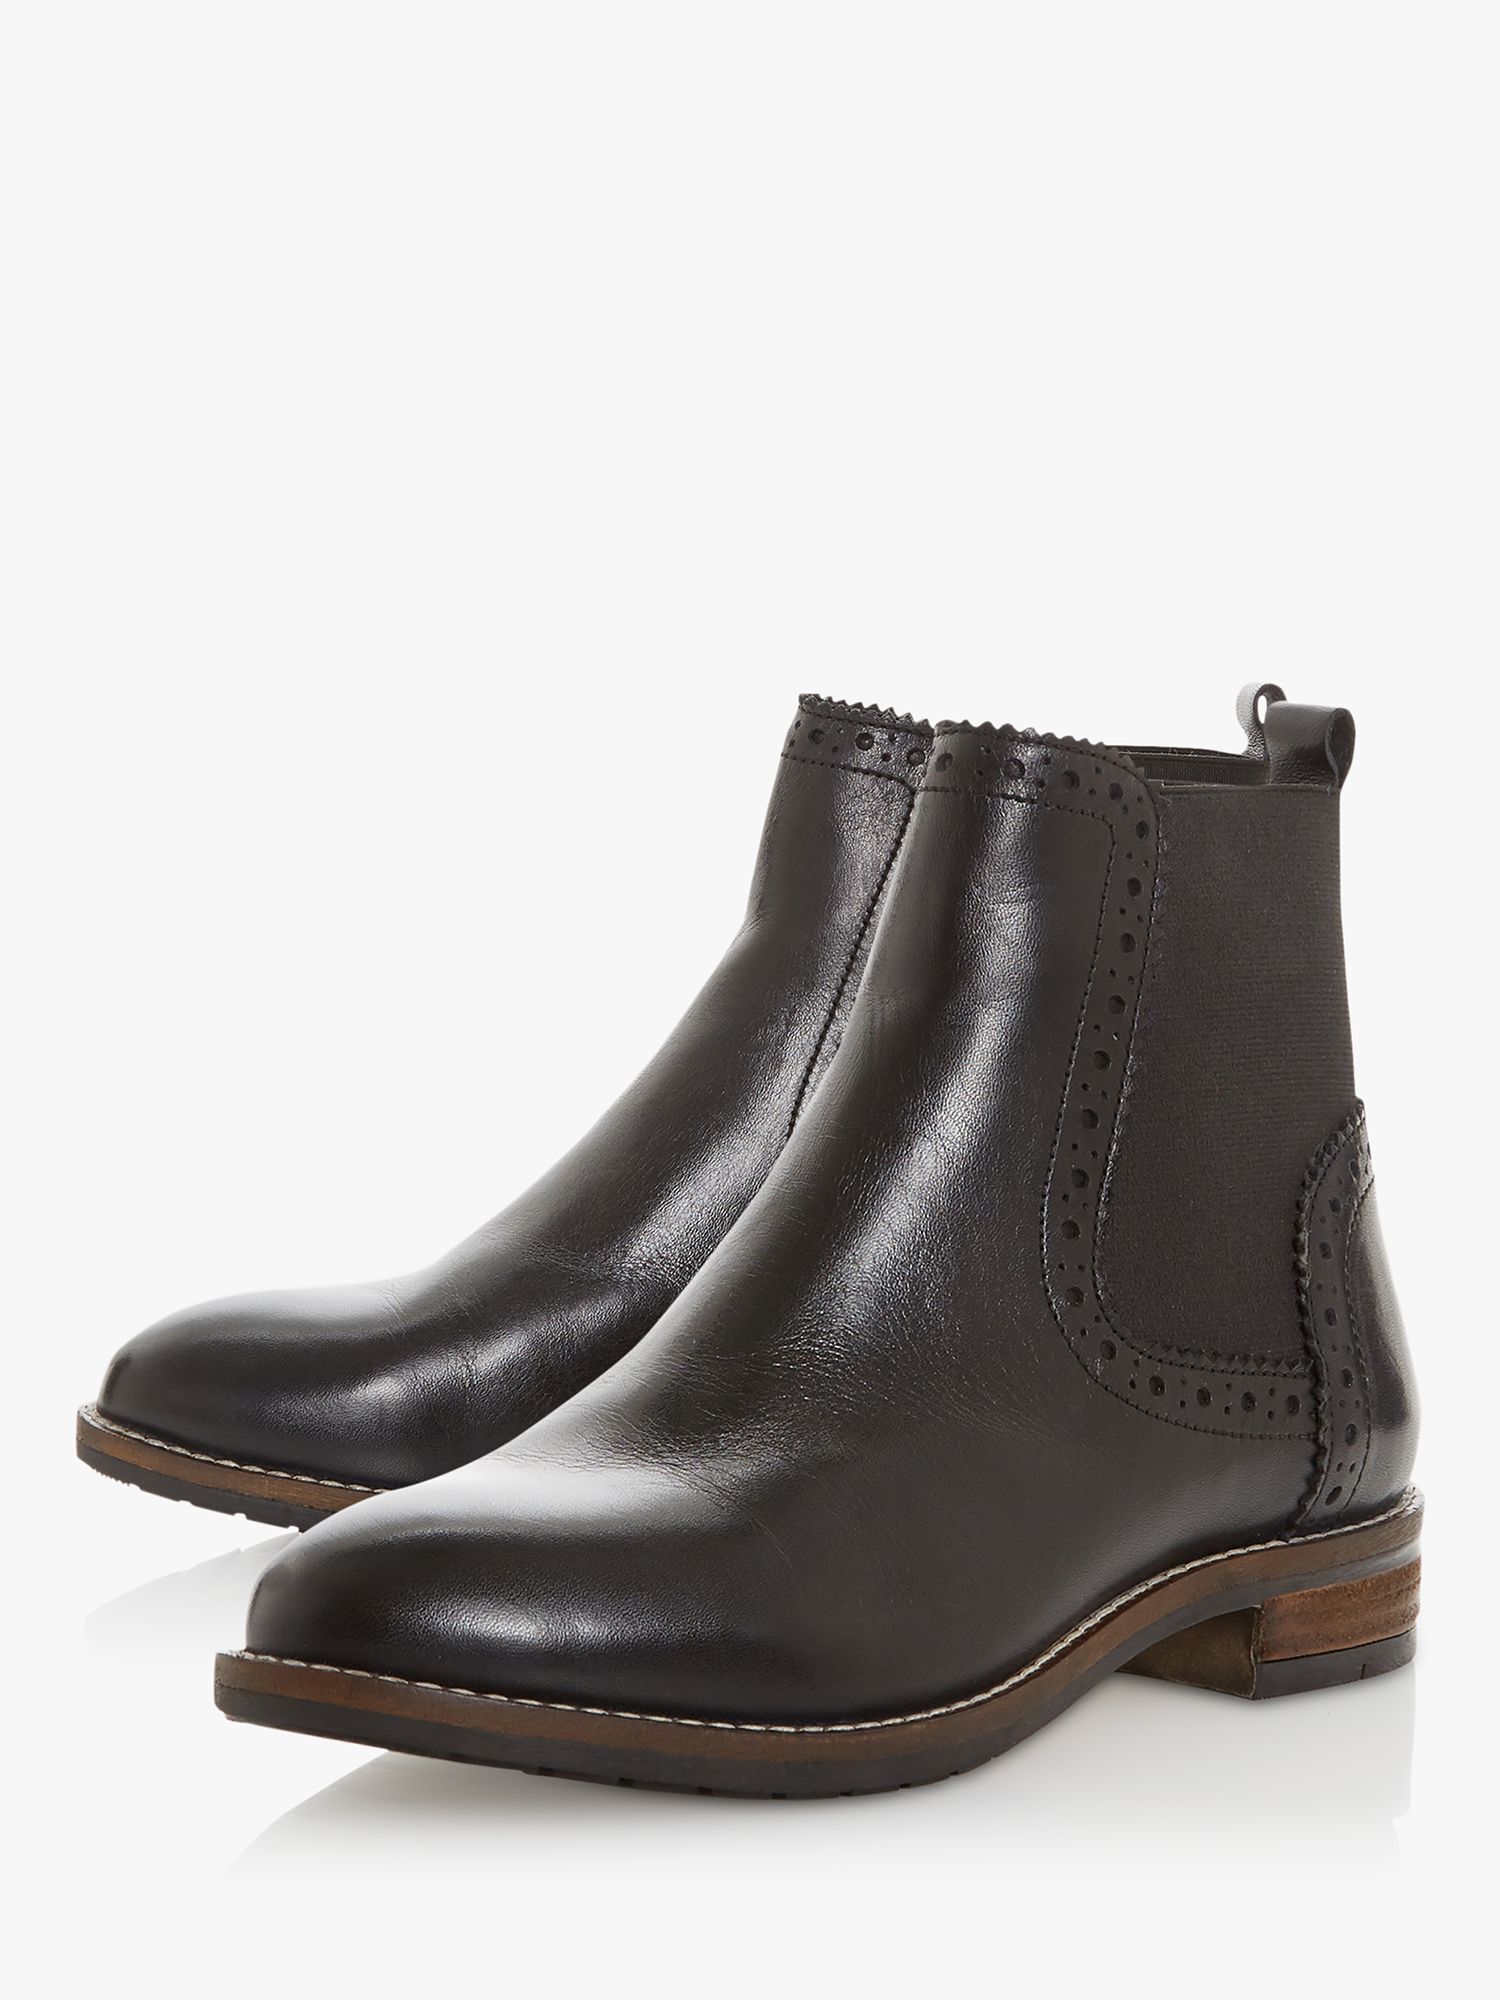 Sobriquette Groene achtergrond Stationair Dune Quant Leather Trimmed Chelsea Boots